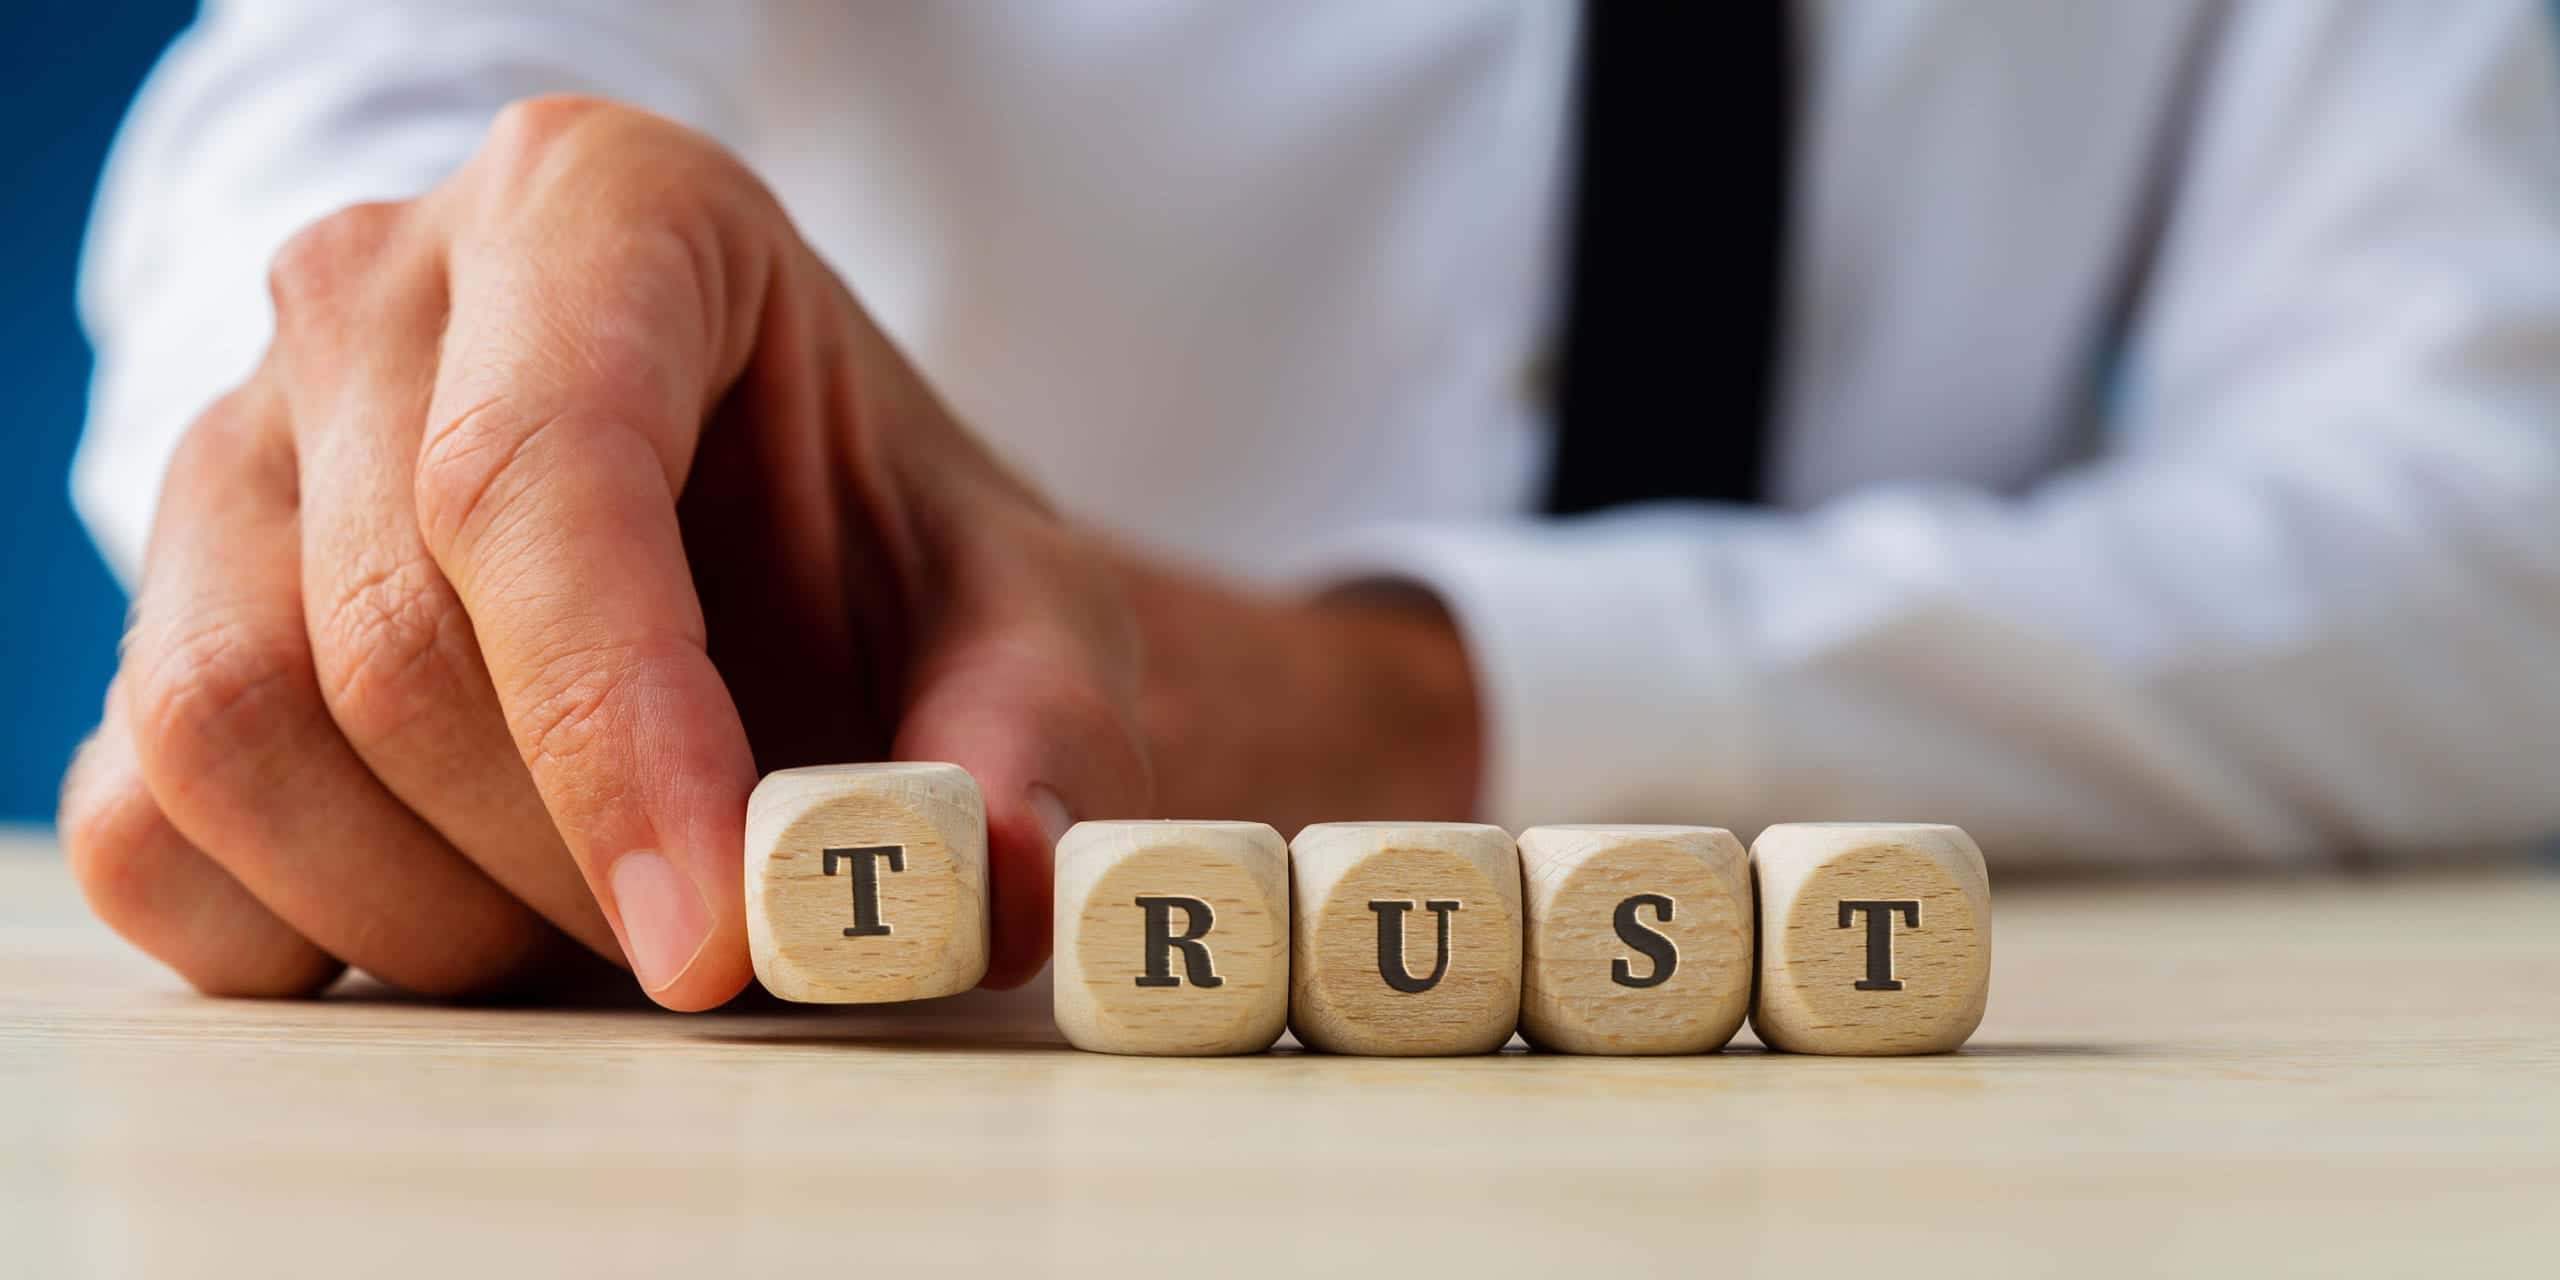 Demonstrate Trustworthiness at Work with These 7 Tips